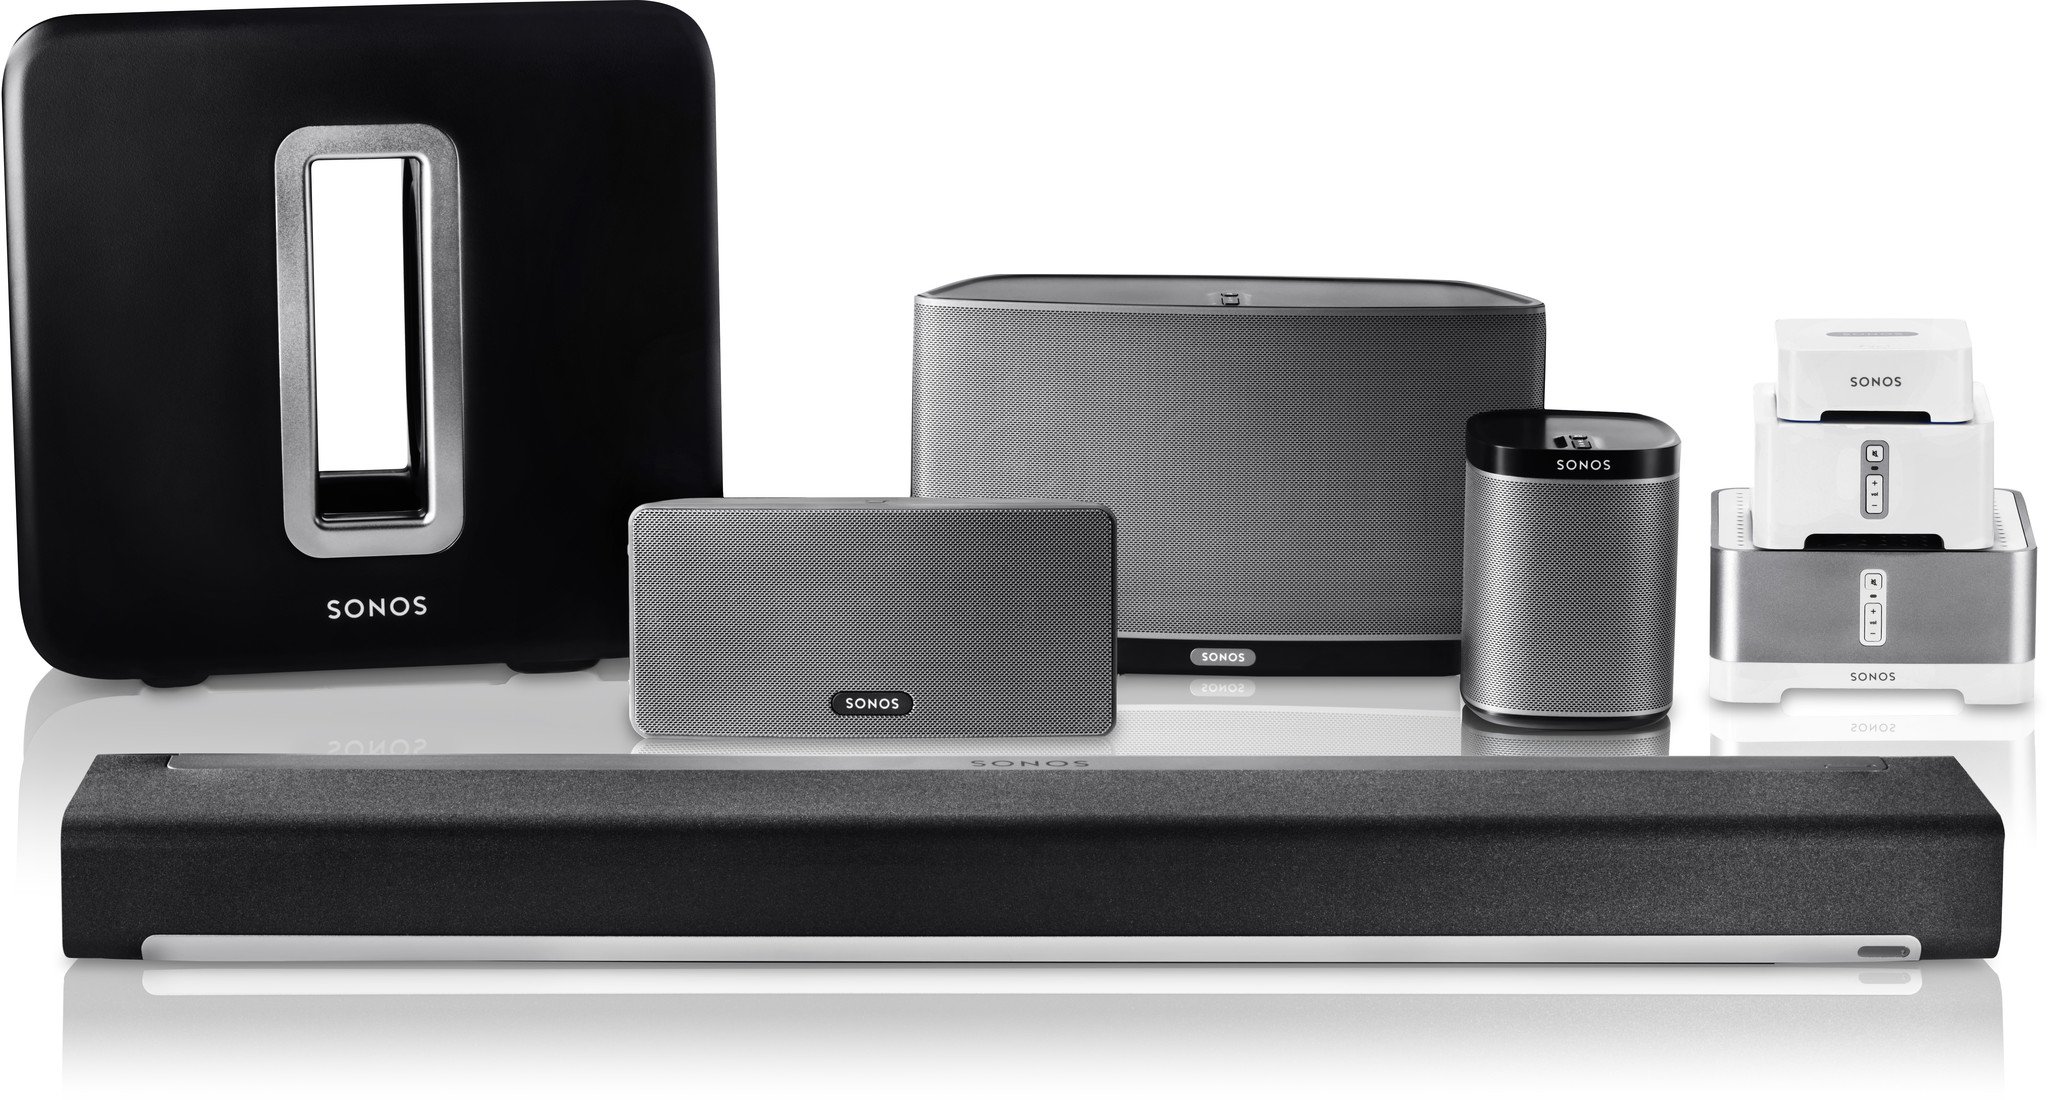 Will Sonos wireless speakers work with 